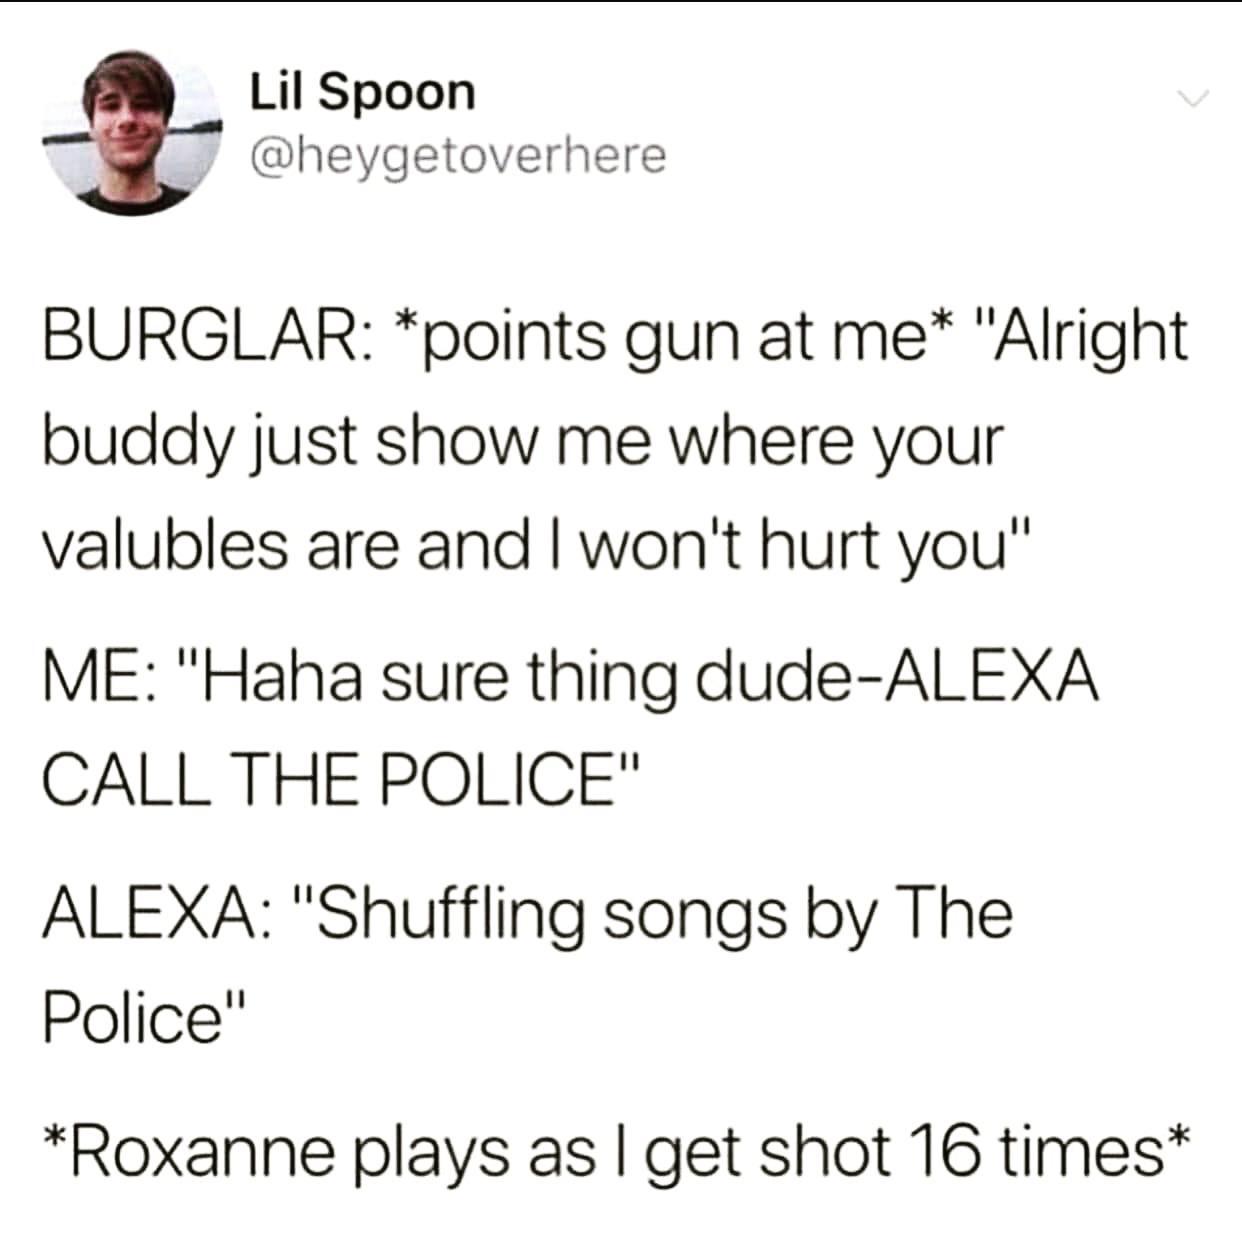 roxanne roxanne all she wanna do is party all night - Lil Spoon Burglar points gun at me "Alright buddy just show me where your valubles are and I won't hurt you" Me "Haha sure thing dudeAlexa Call The Police" Alexa "Shuffling songs by The Police" Roxanne